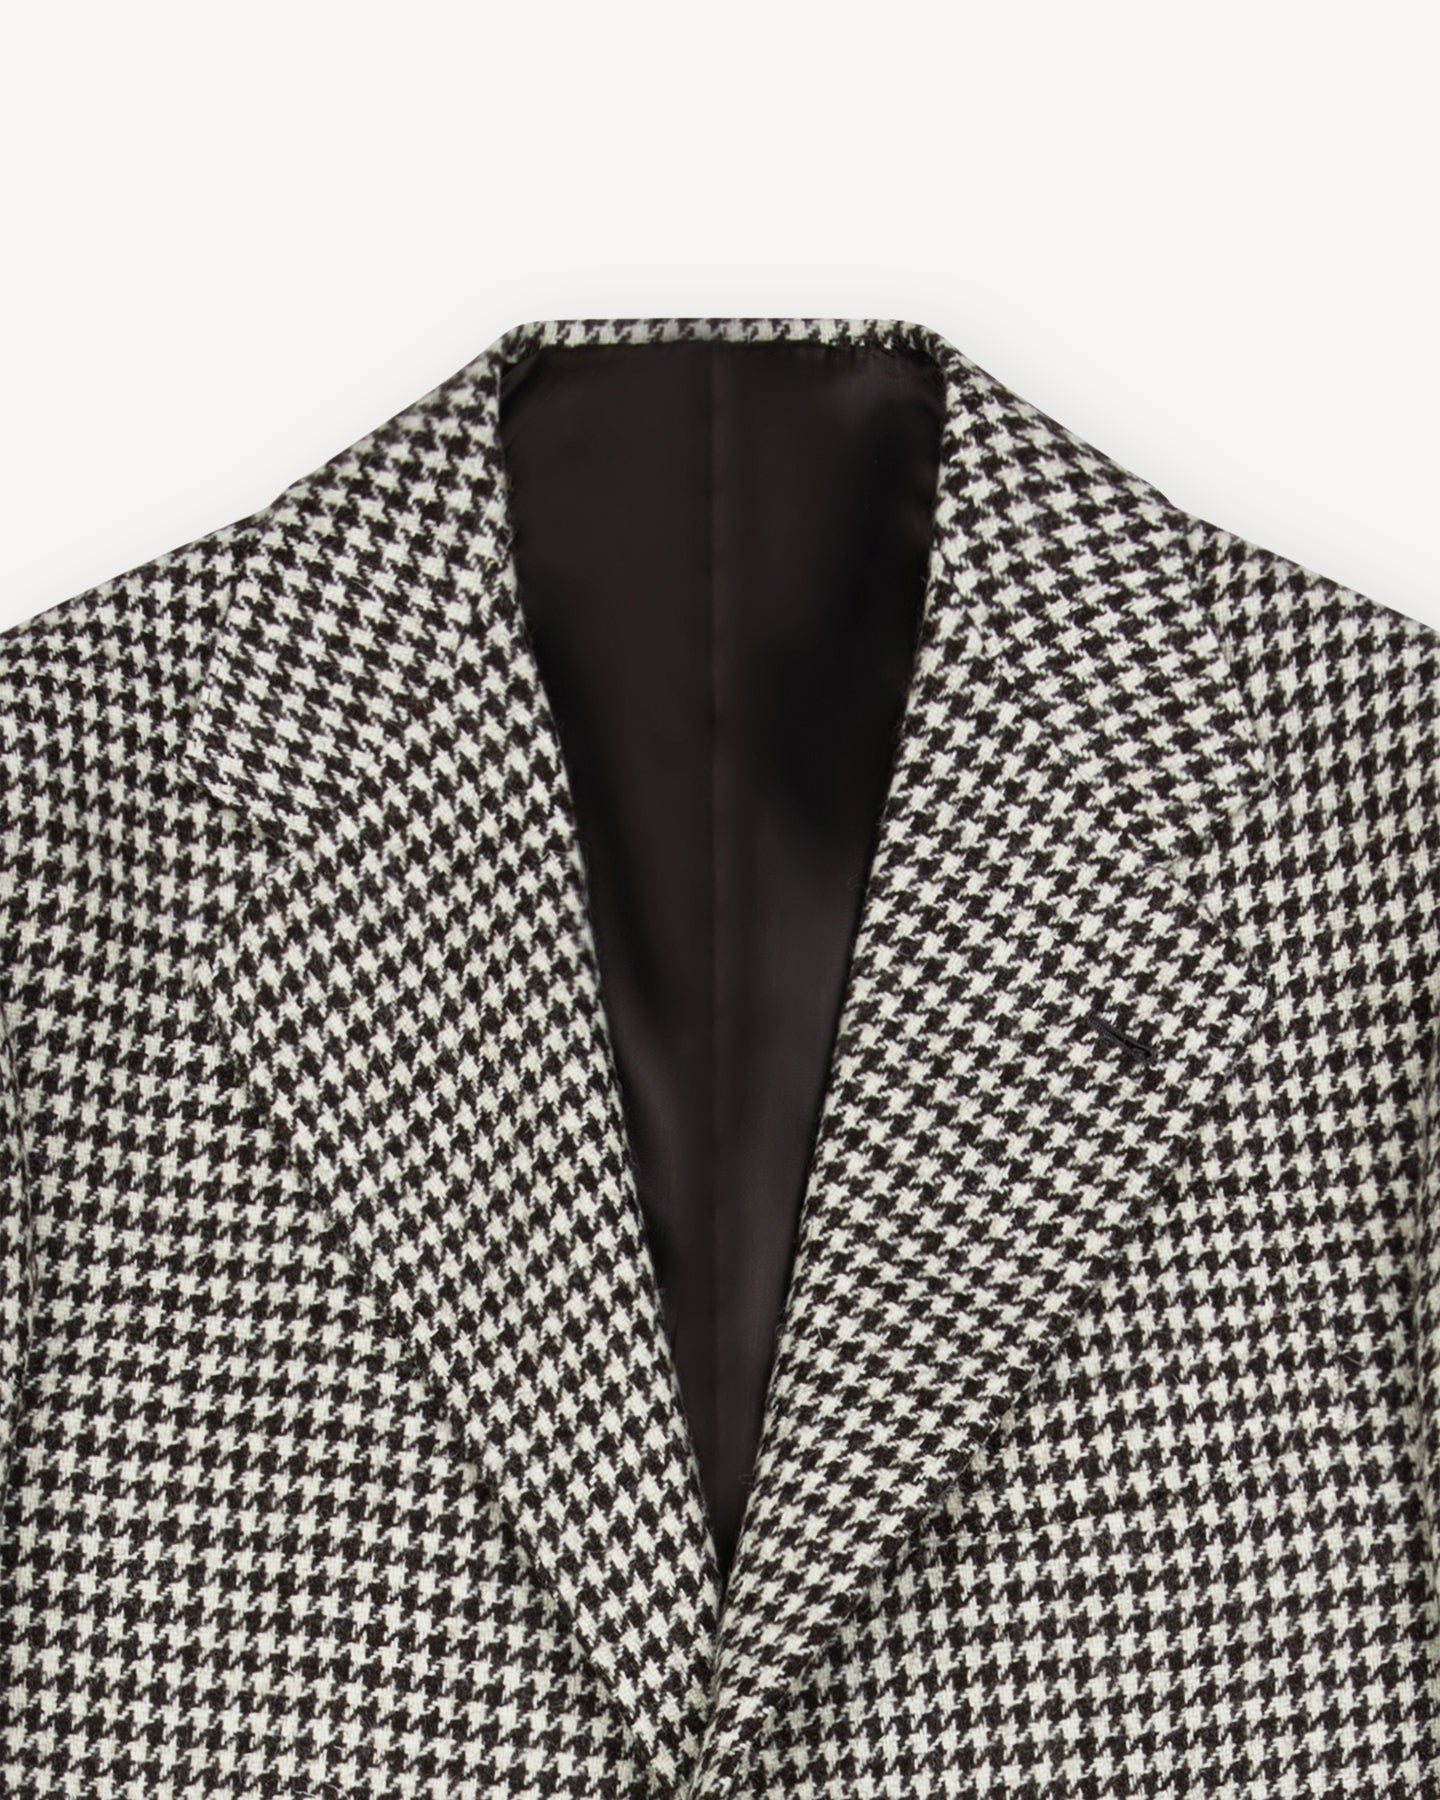 Black / White Houndstooth Undyed Wool Sport Coat with notch lapels